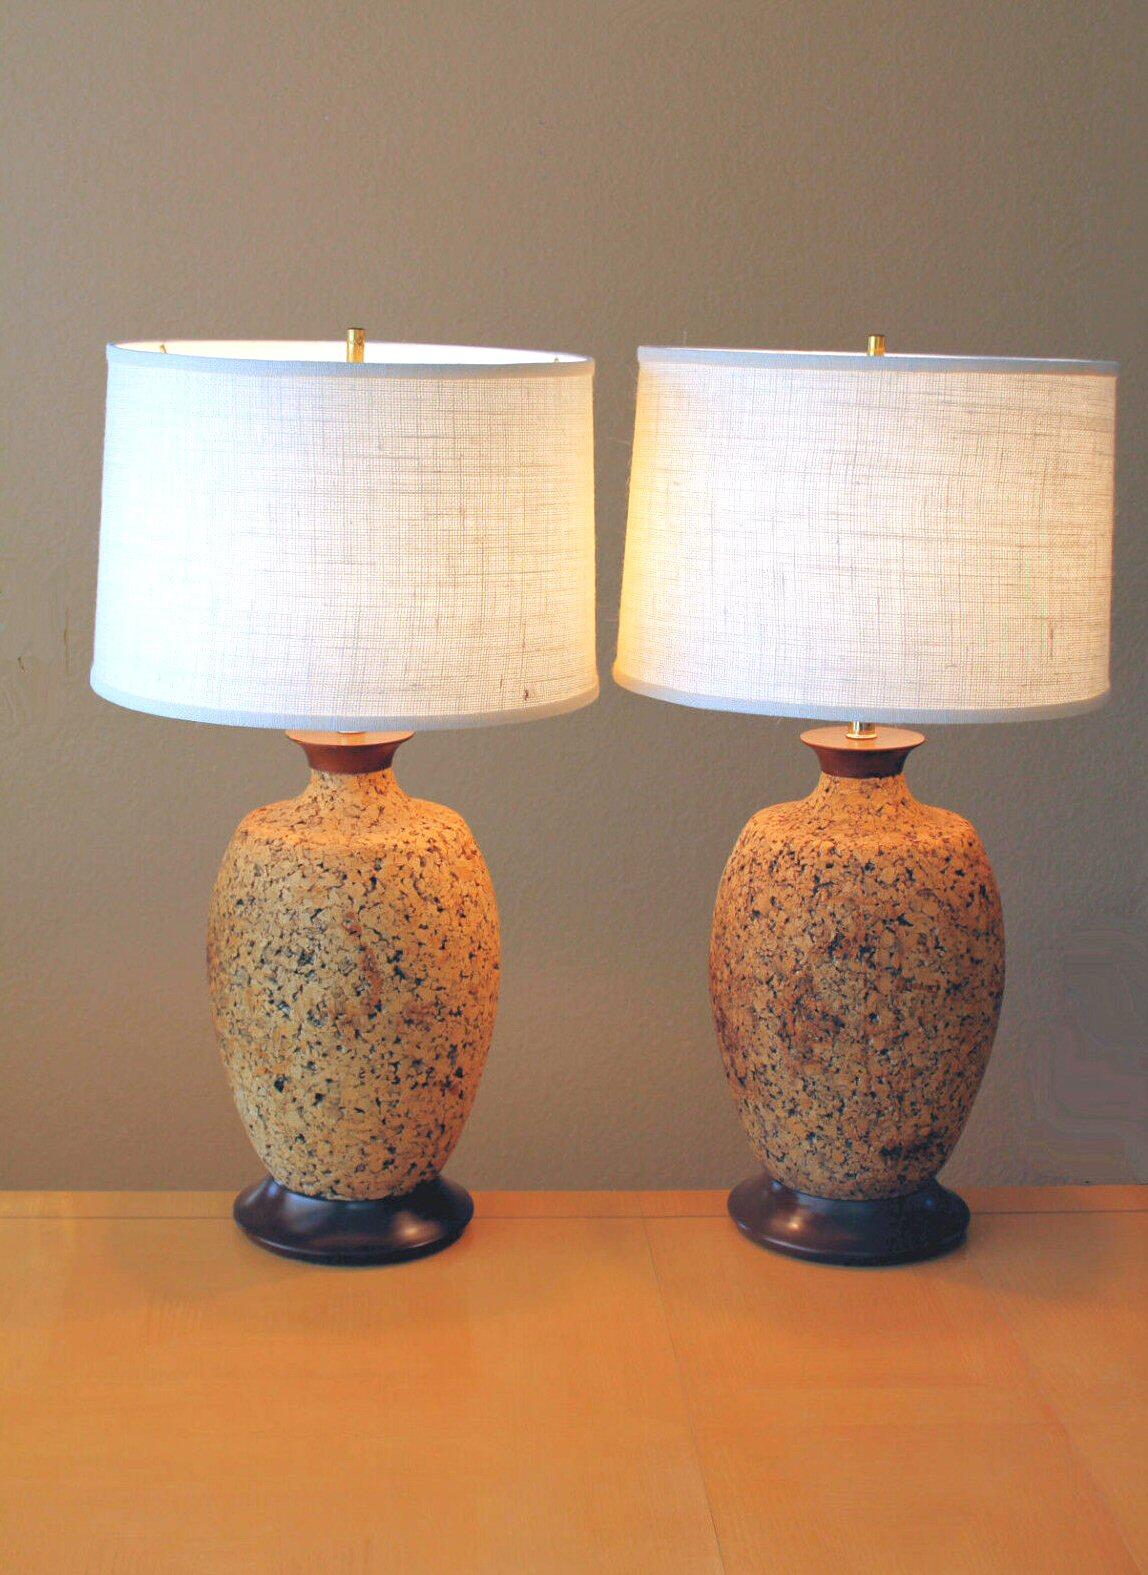 SENSATIONAL!

PAIR
MID CENTURY
DECORATIVE CORK 
TABLE LAMPS

 
In the Manner of Raymor

MID CENTURY PANACHE!

Dimensions:  35